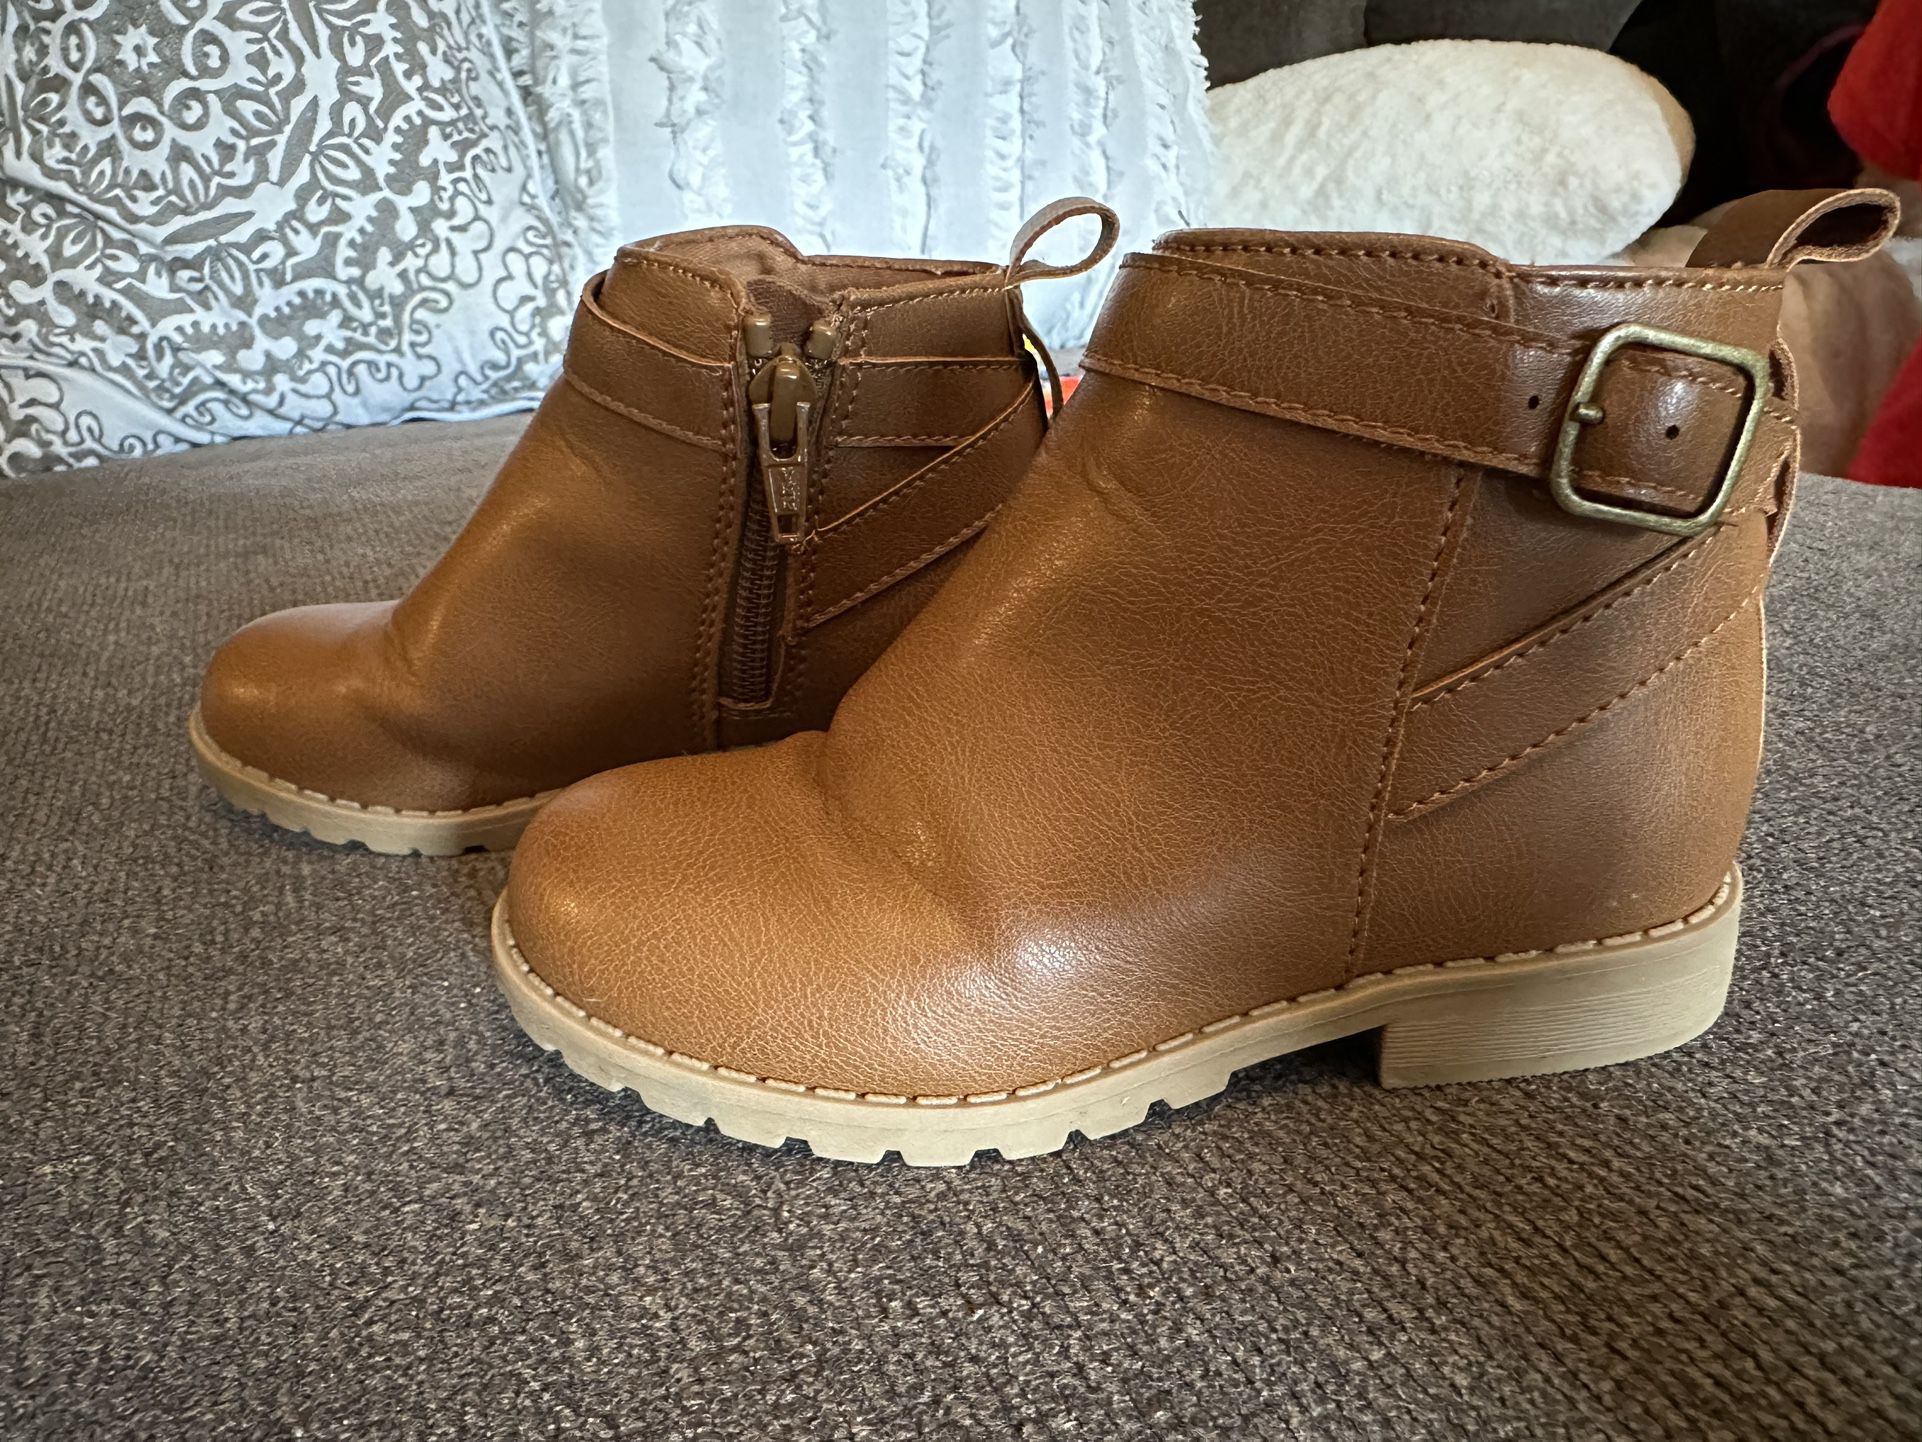 Girls Toddler Cognac Leather Boots 